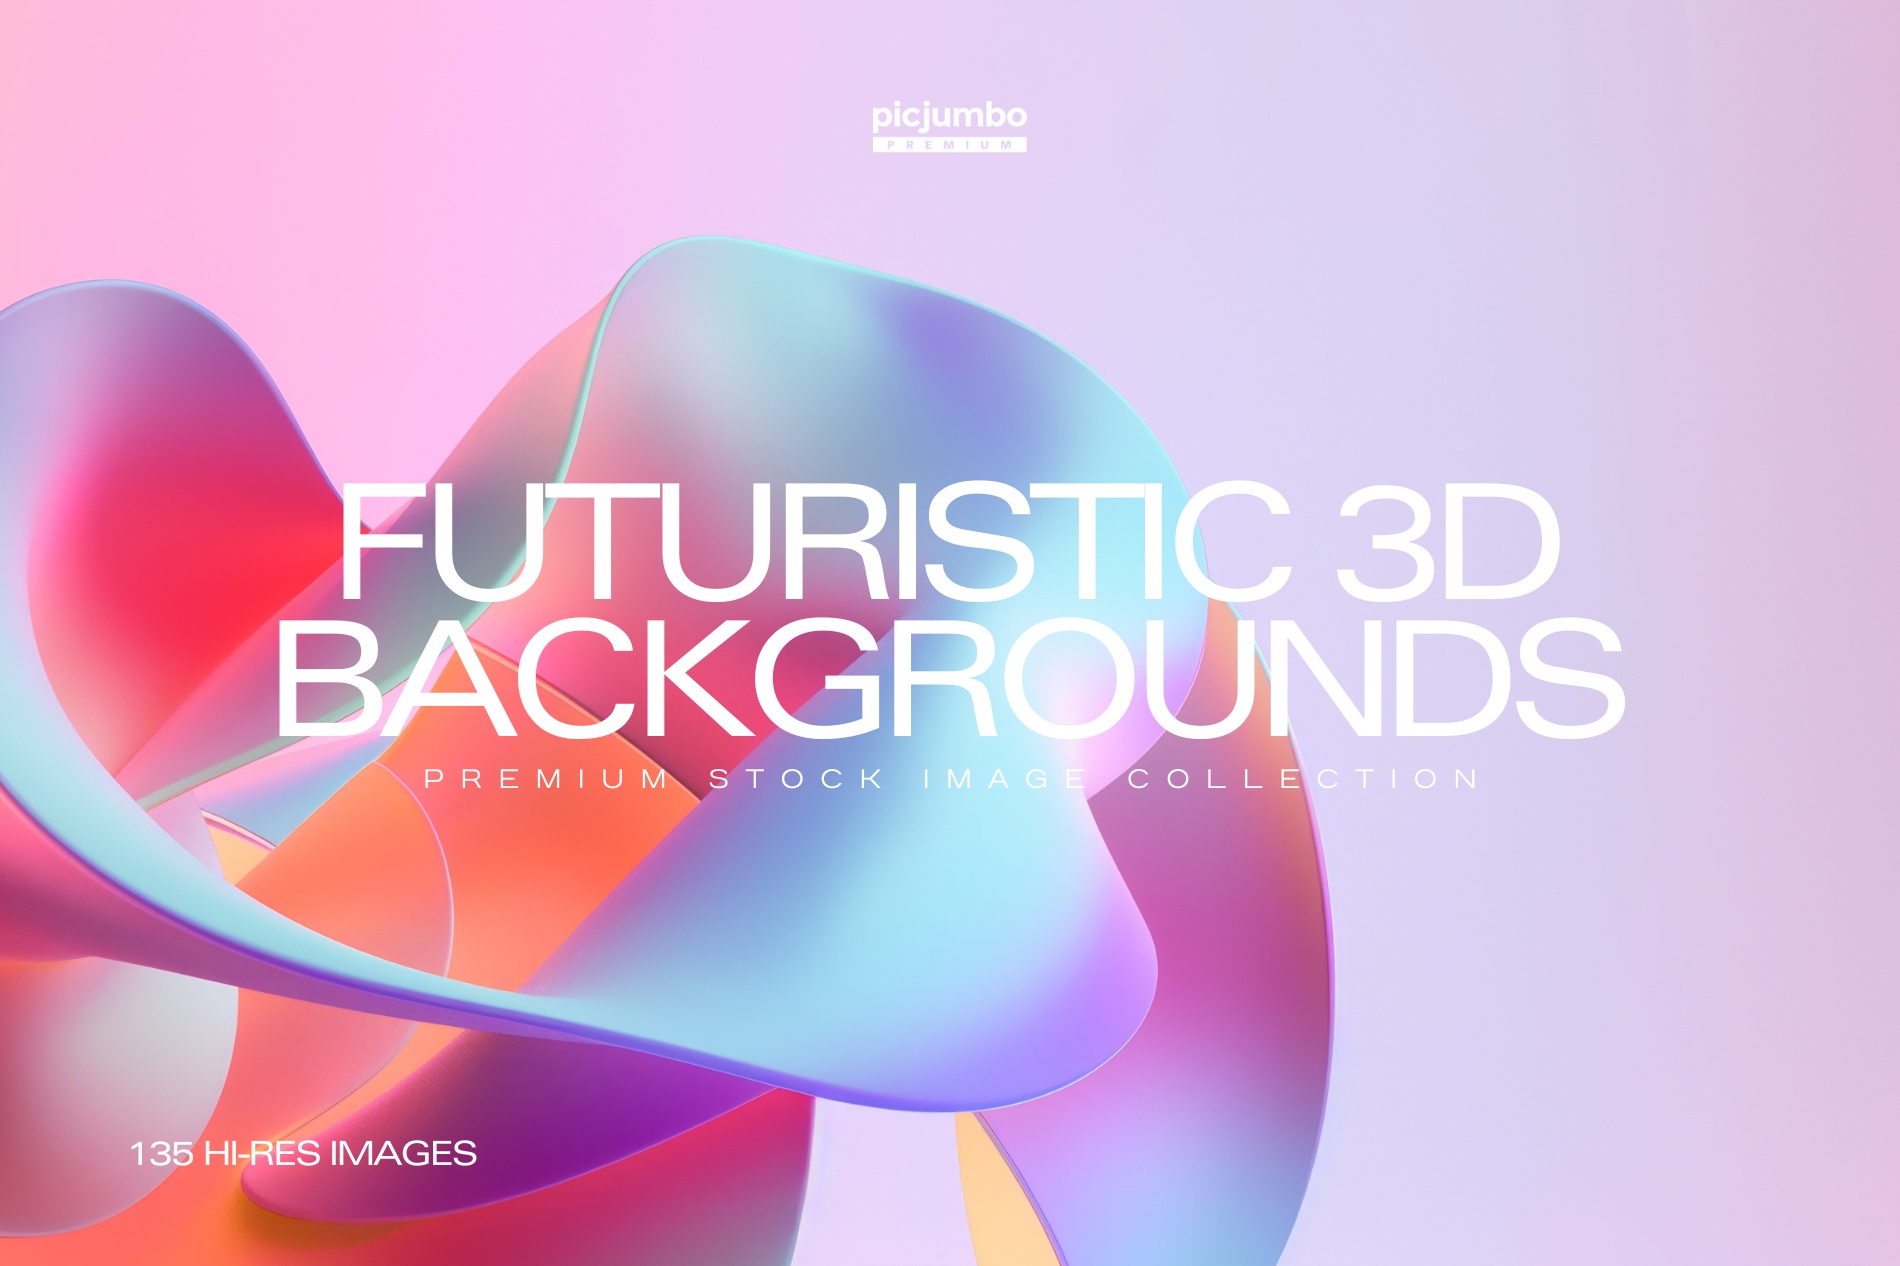 Download hi-res stock photos from our Futuristic 3D Backgrounds PREMIUM Collection!